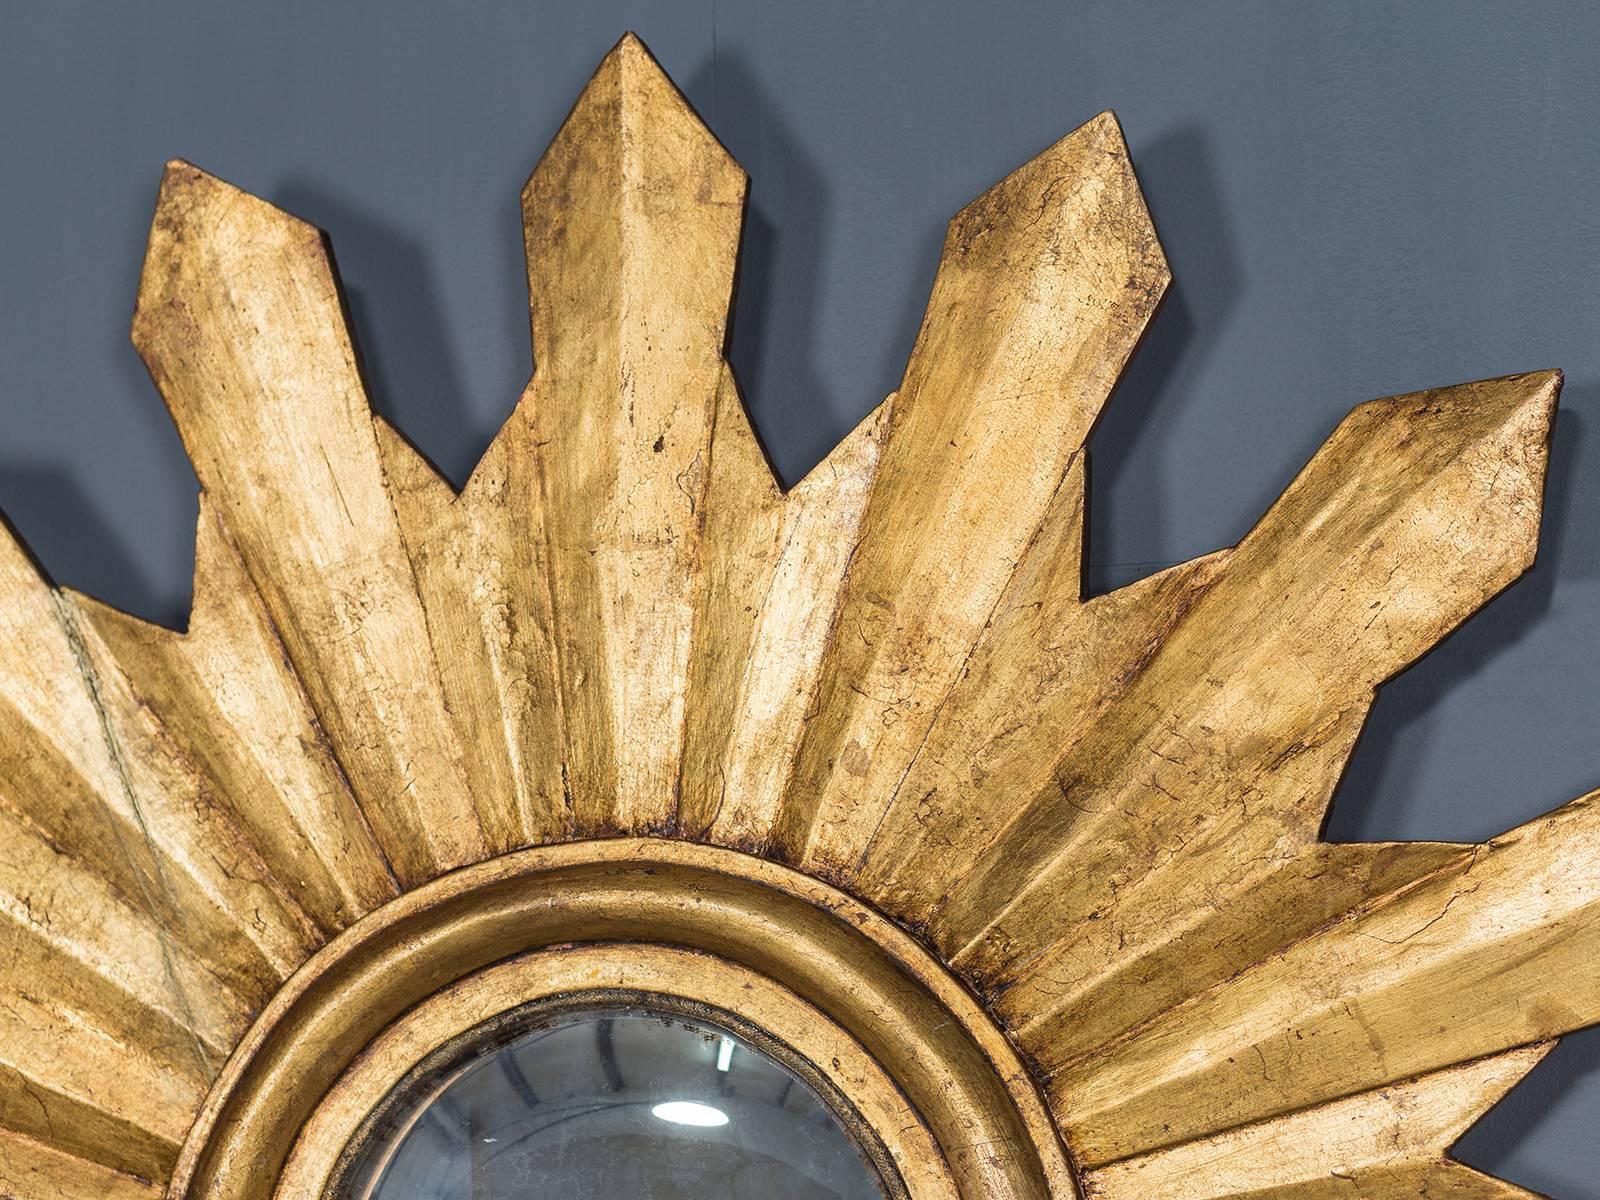 Receive our new selections direct from 1stdibs by email each week. Please click Follow Dealer below and see them first!

The bold and sculptural effect of this antique Italian starburst mirror, circa 1880 is quite striking. The 16 geometric points